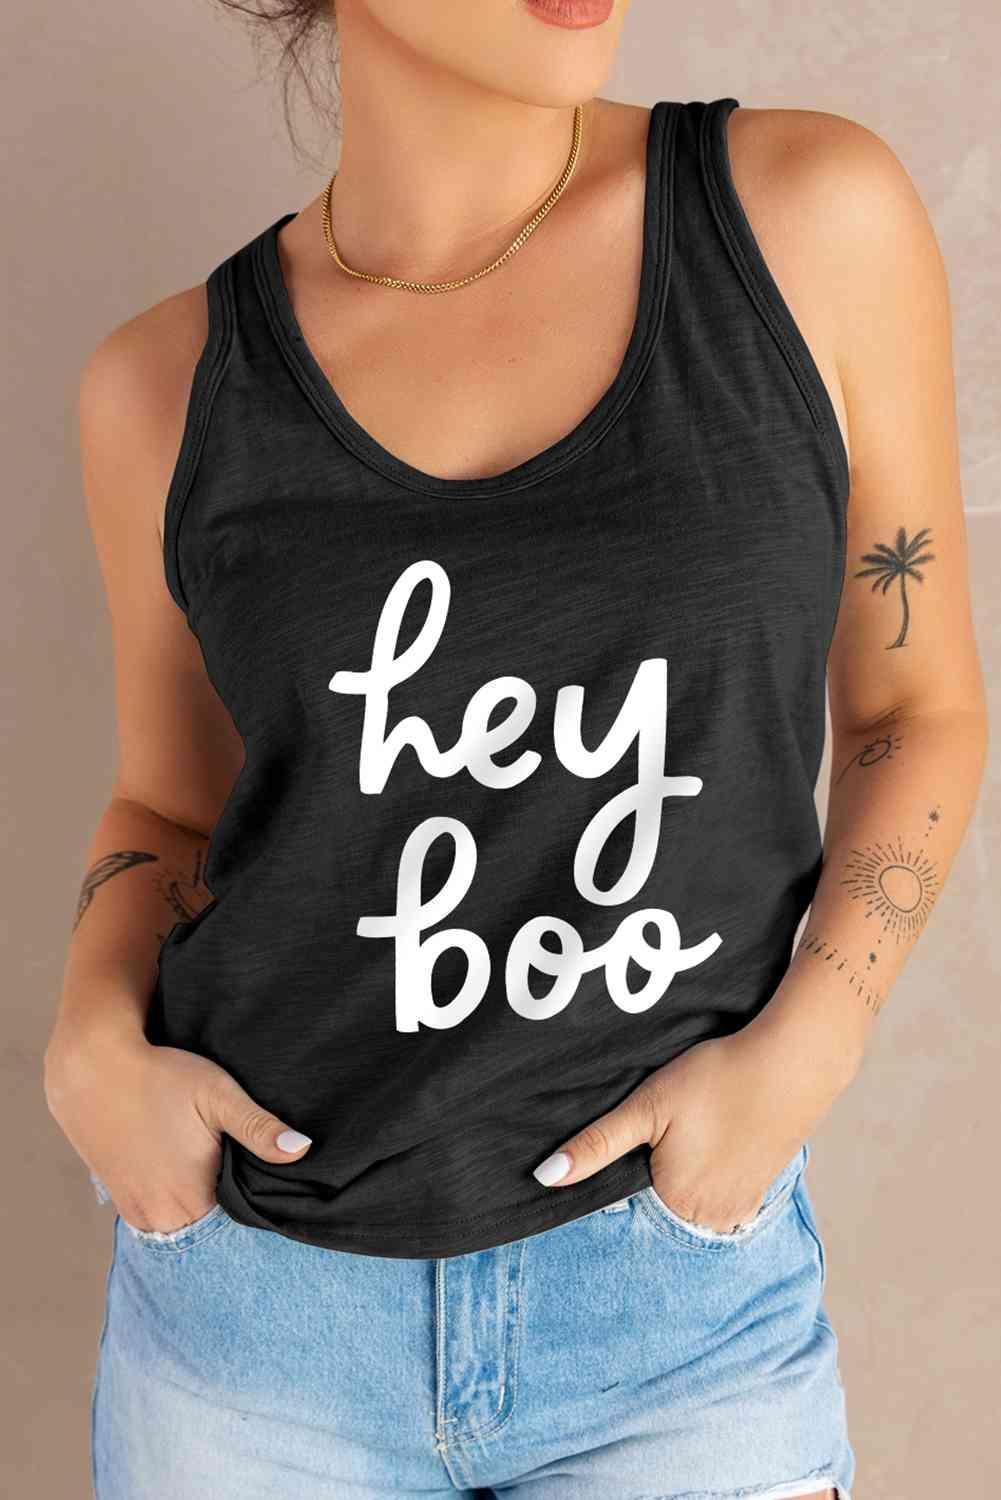 a woman wearing a black tank top that says hey boo